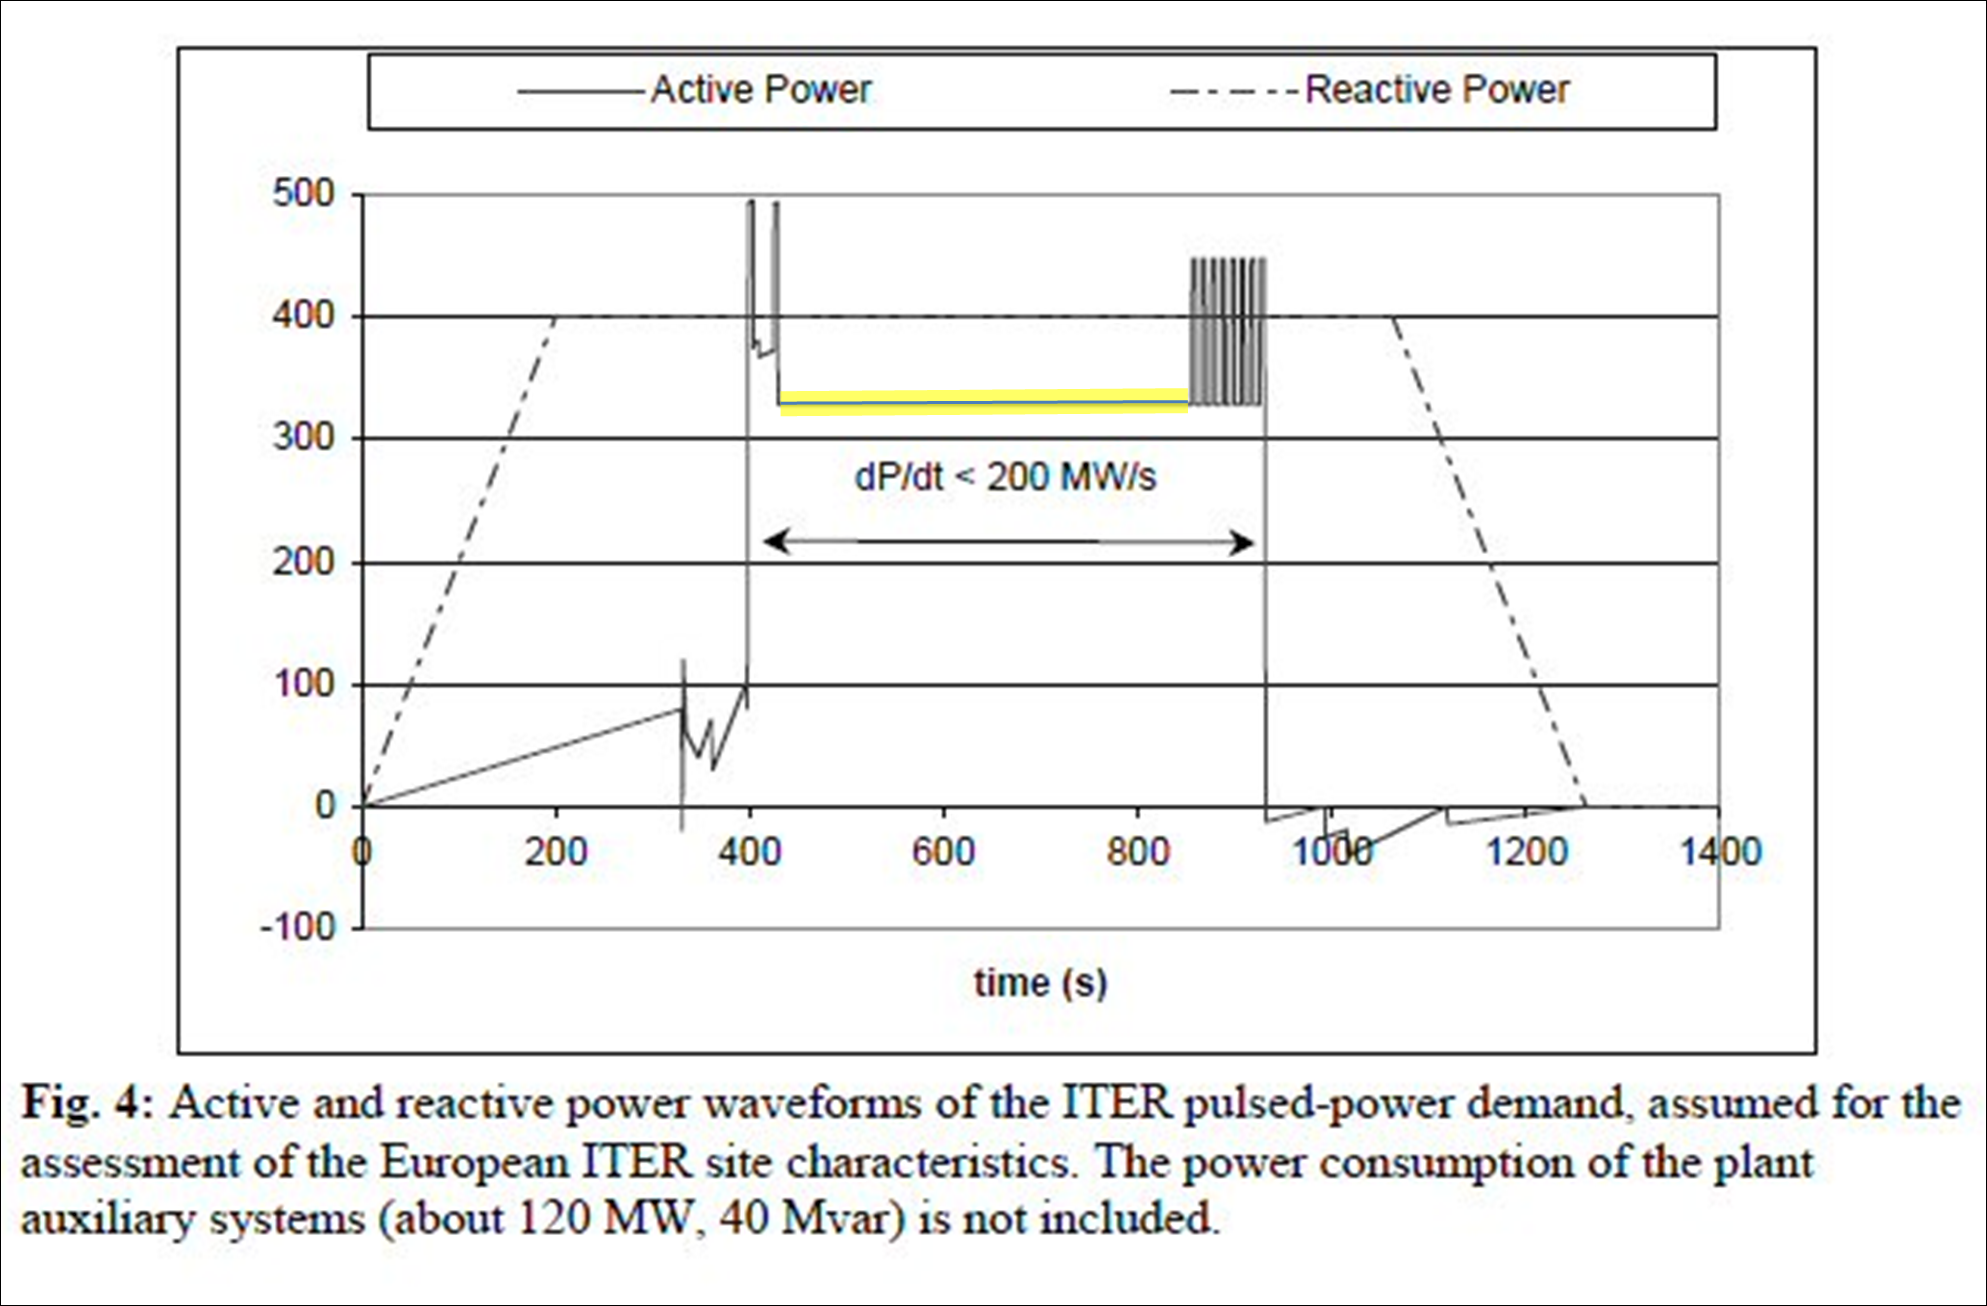 Benfatto computer simulation of ITER reactor active and reactive power drains